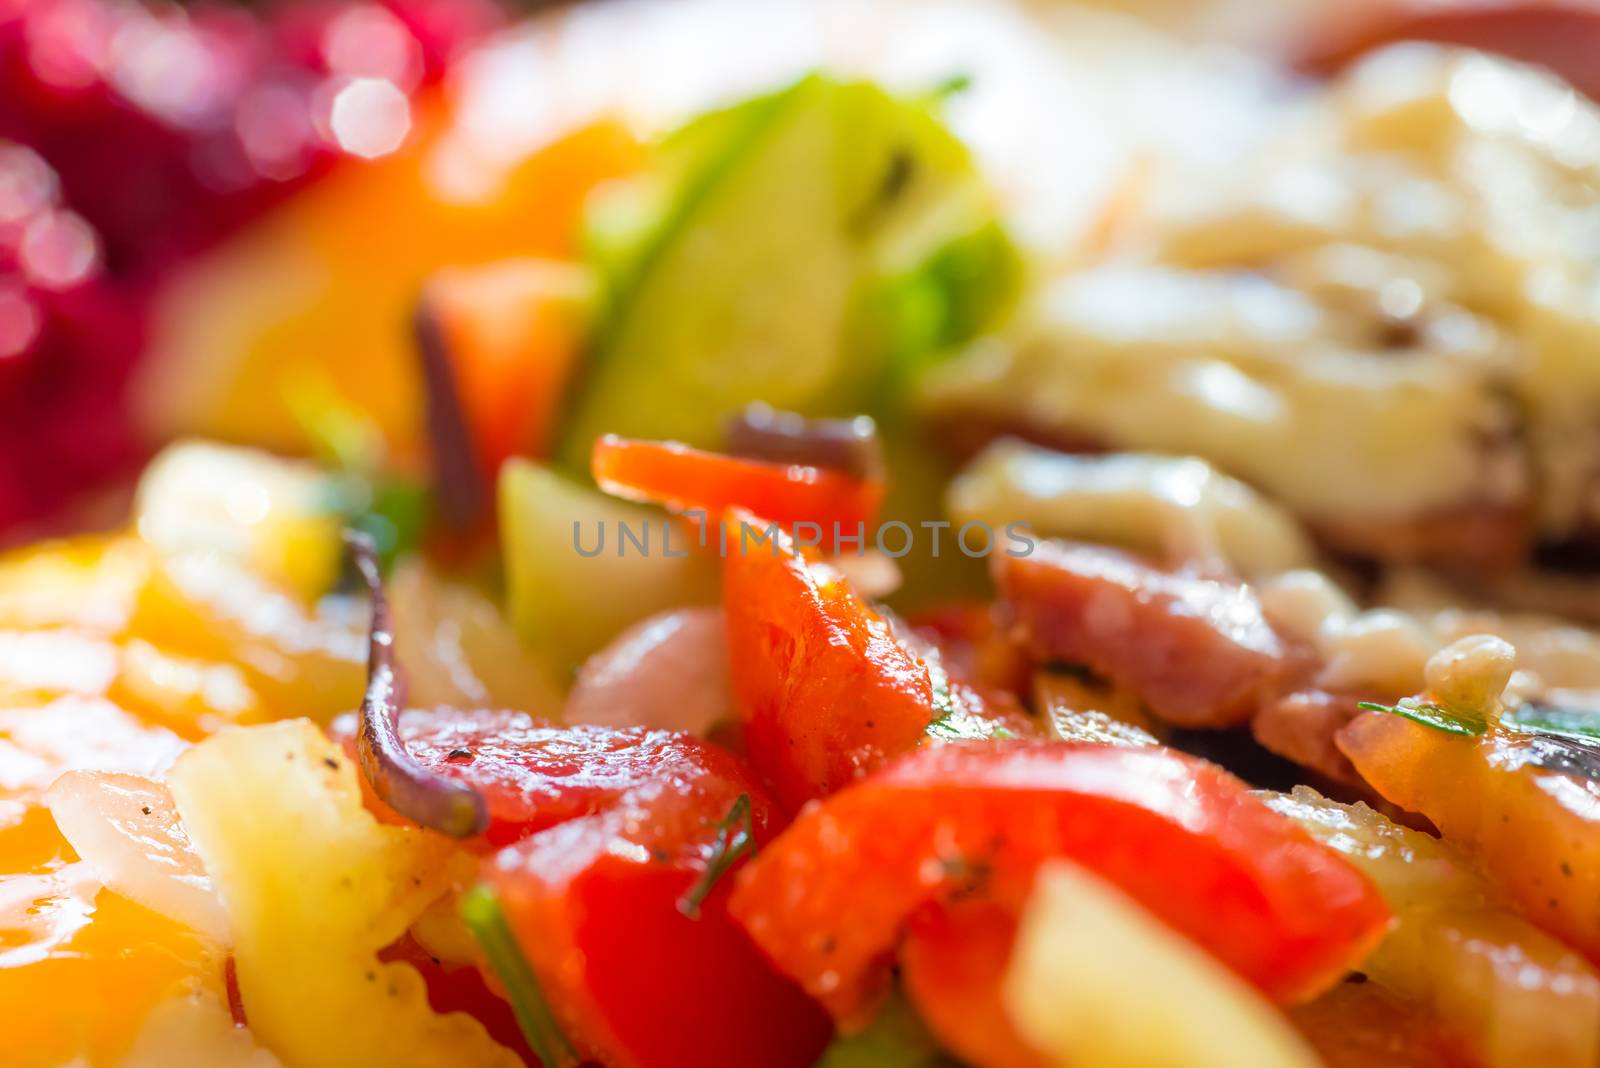 Fresh salad with tomato and fresh vegetable close up